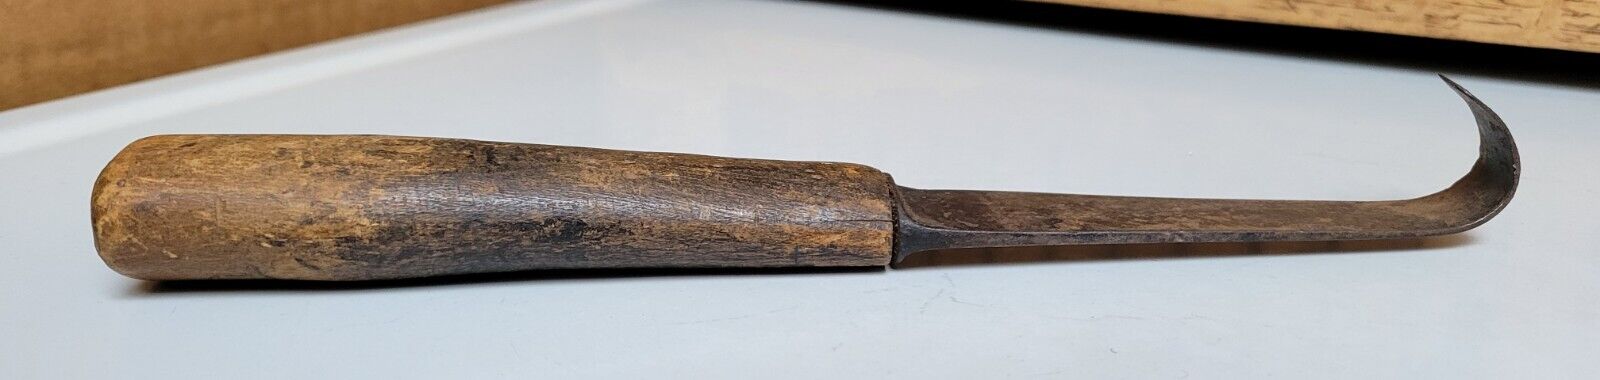 Antique Race Knife/ Timber Scribe